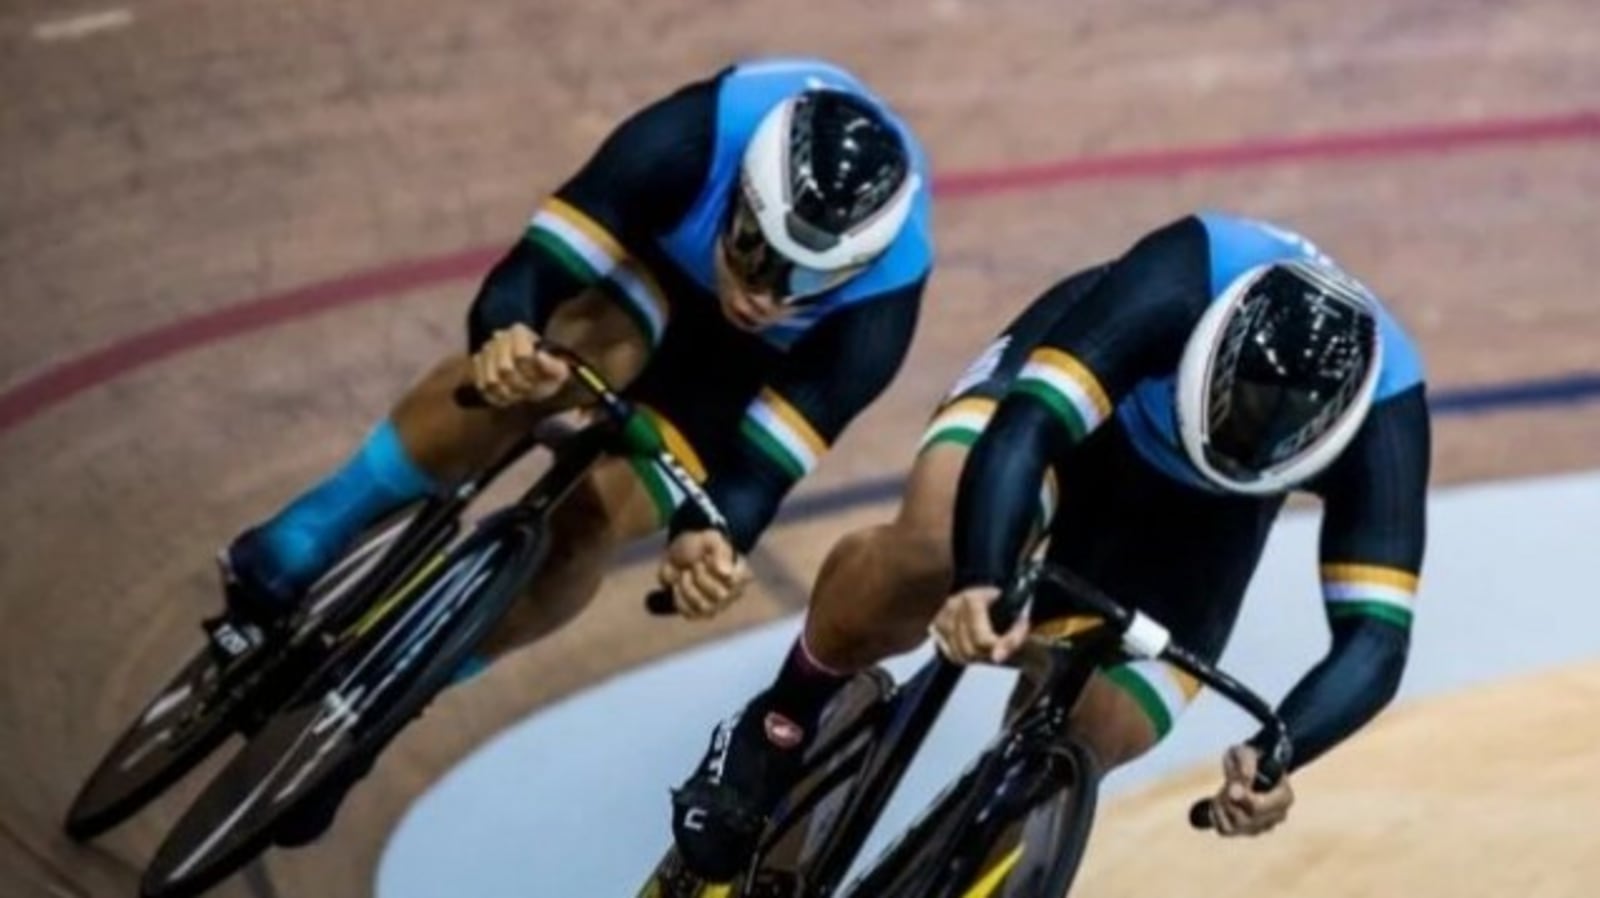 After controversies, Indian cycling looks to get back on track